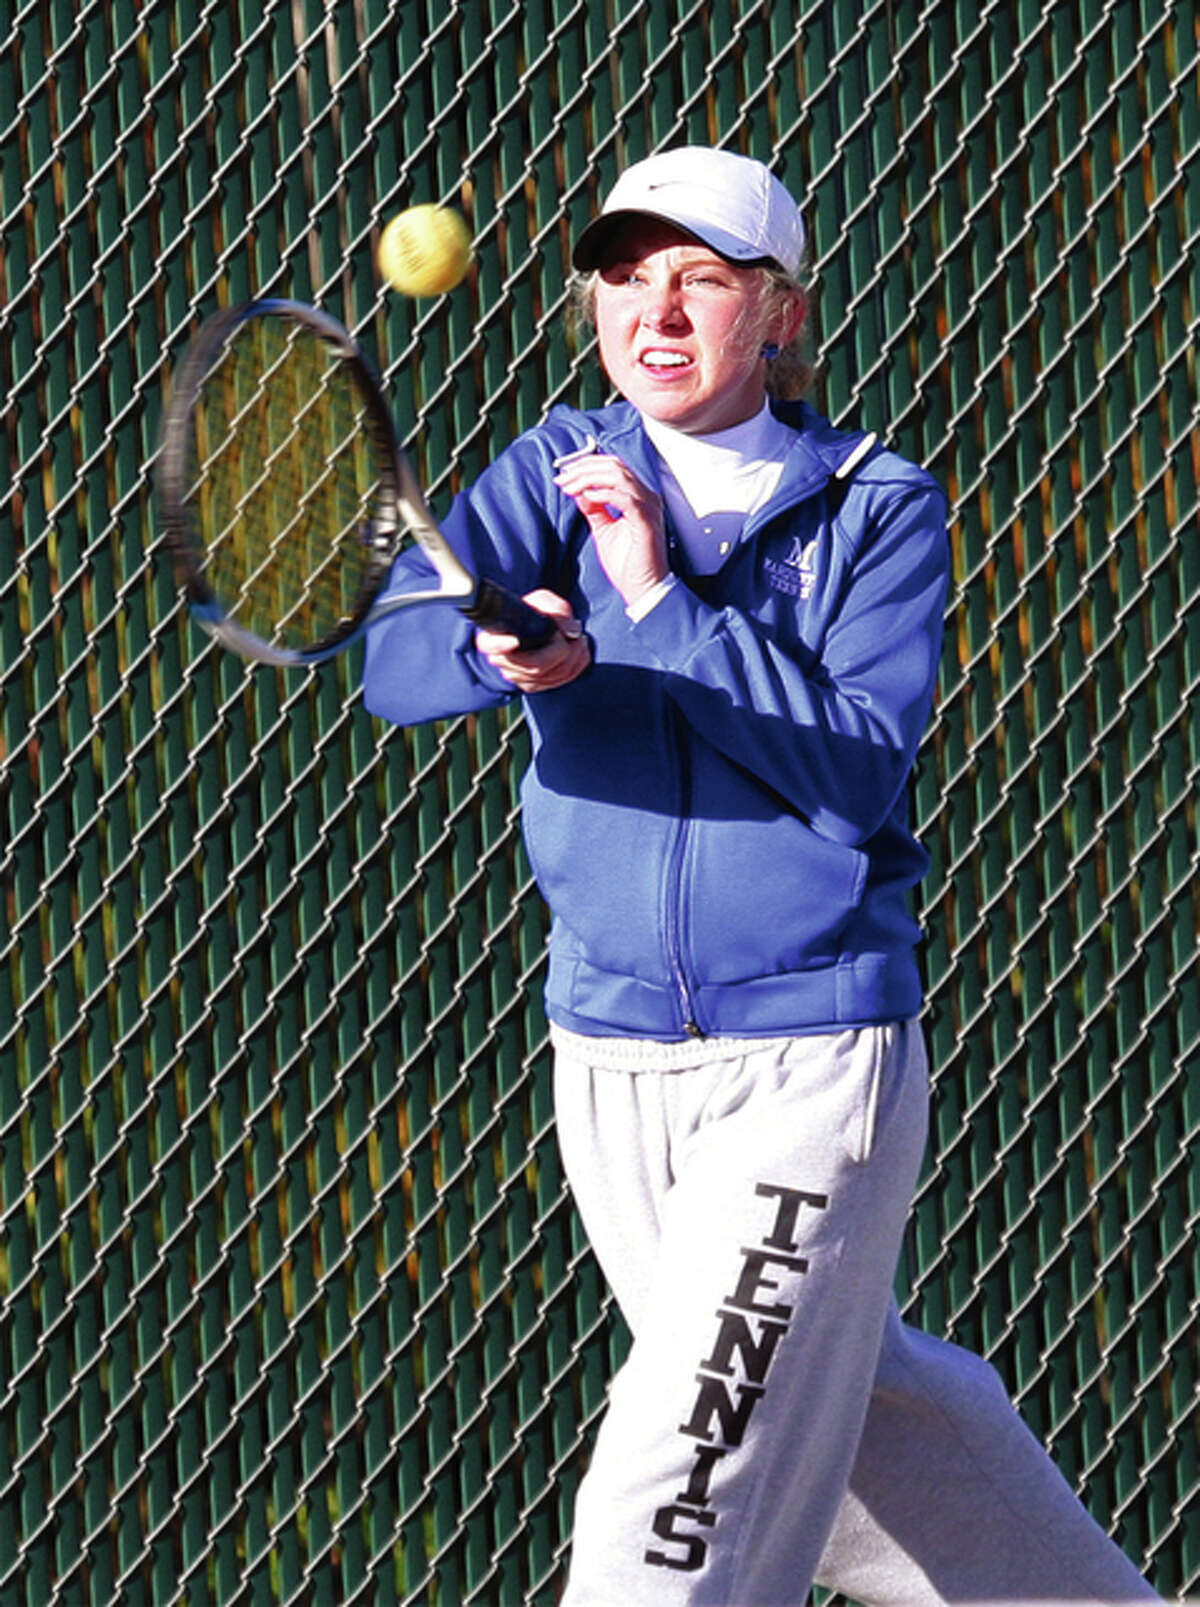 Marquette Catholic senior Elena Gable hits a shot during a semifinal doubles match Saturday morning at the Alton Sectional at the AHS courts in Godfrey. Gable and doubles partner Laura Moore open state tourney play Thursday in Buffalo Grove.